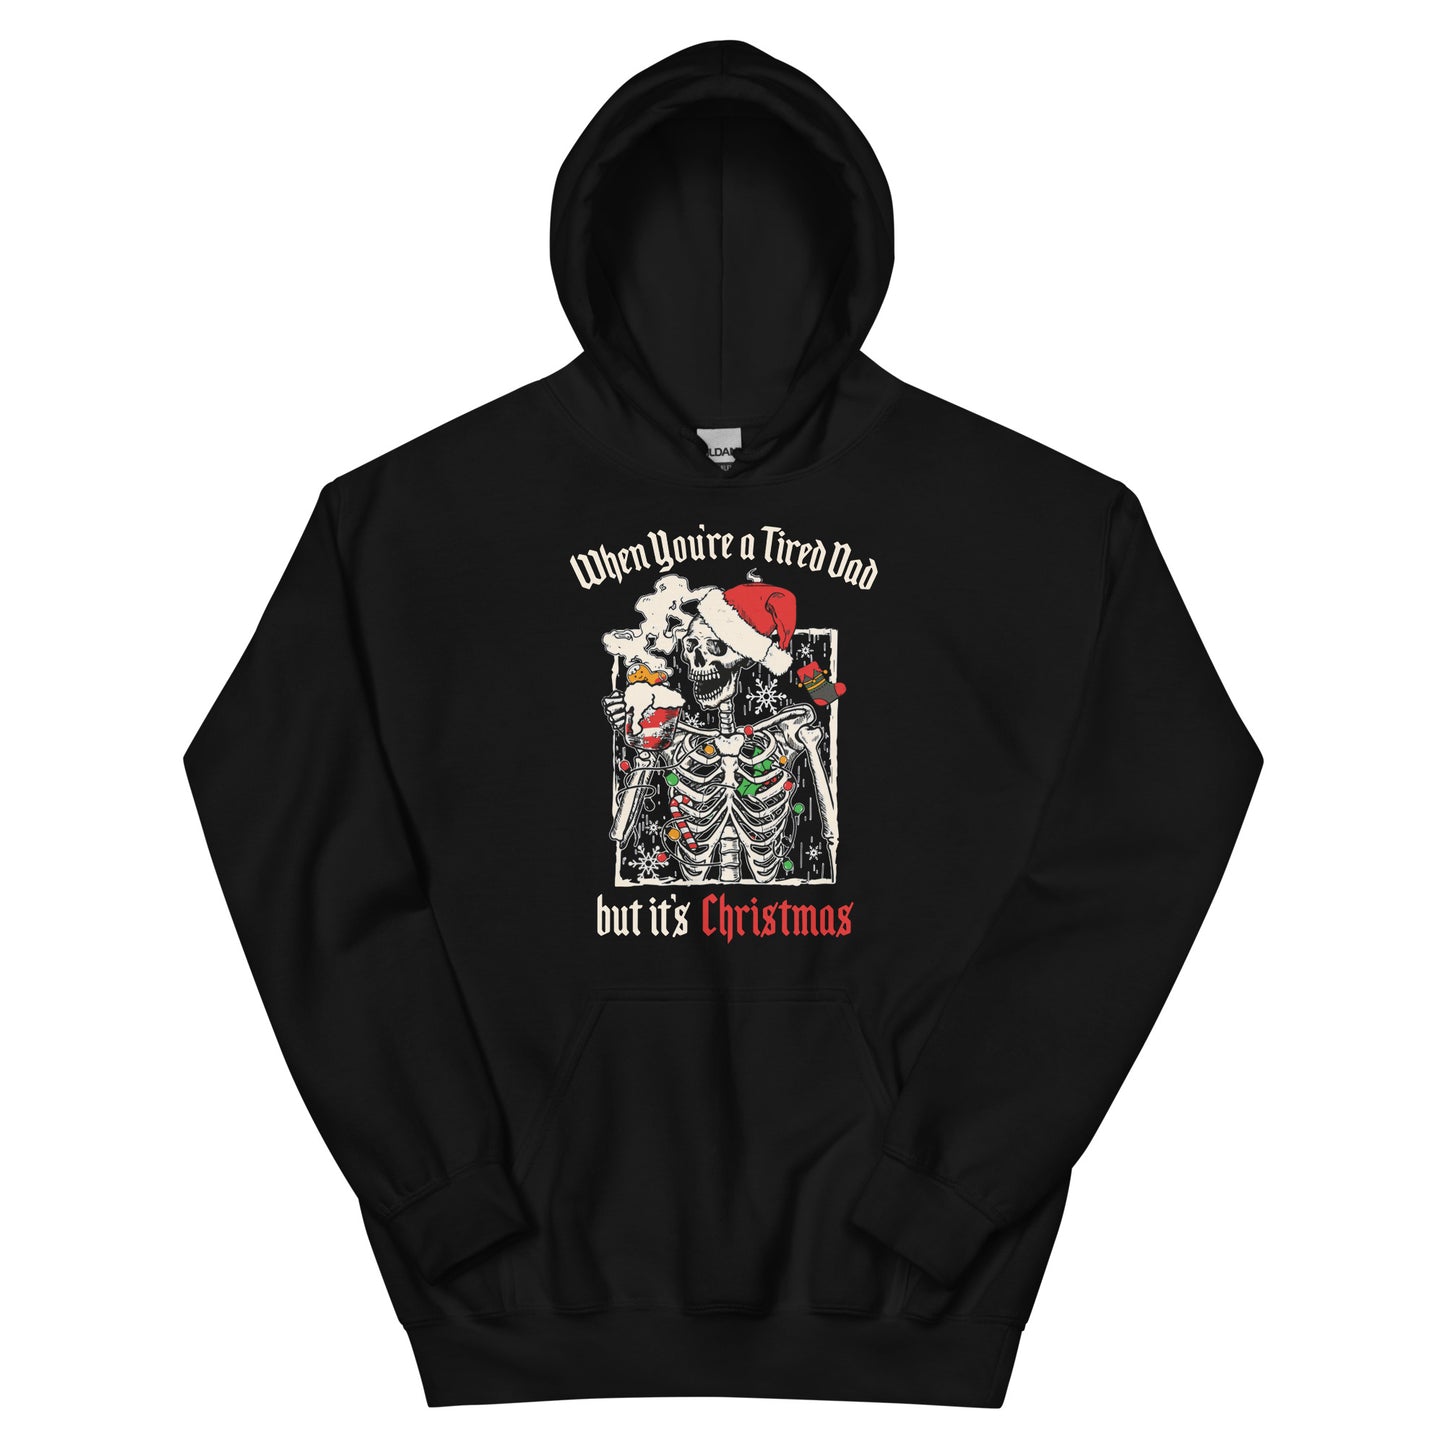 "When You're A Tired Dad" Old English Holiday Hoodie